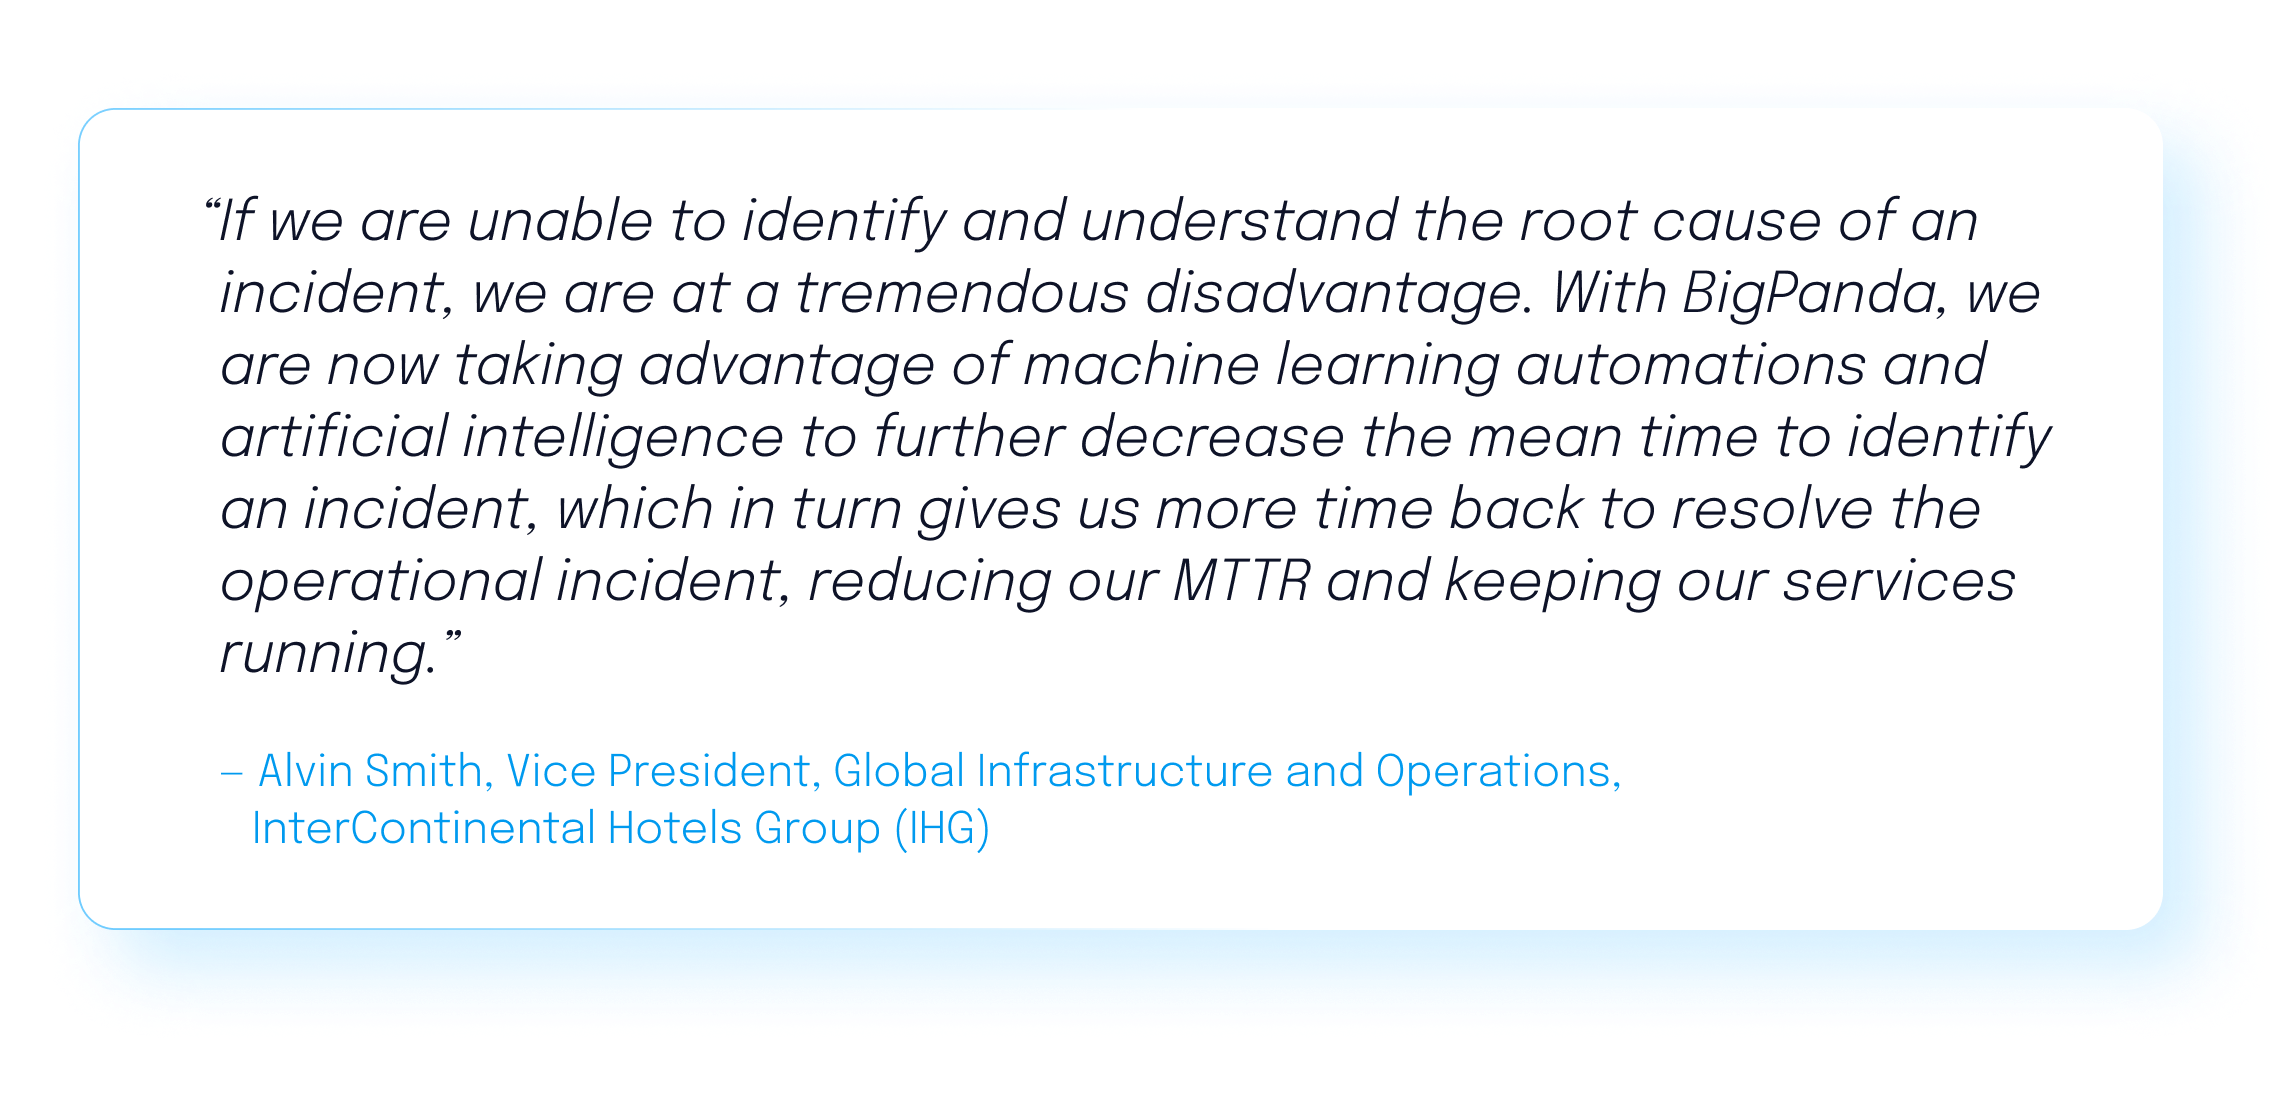 Customer quote: "If we are unable to identify and understand the root cause of an incident, we are at a tremendous disadvantage. With BigPanda, we are now taking advantage of machine learning automations and AI to further decrease the mean time to identify an incident." Alvin Smith, Vice President of InterContinental Hotels Group